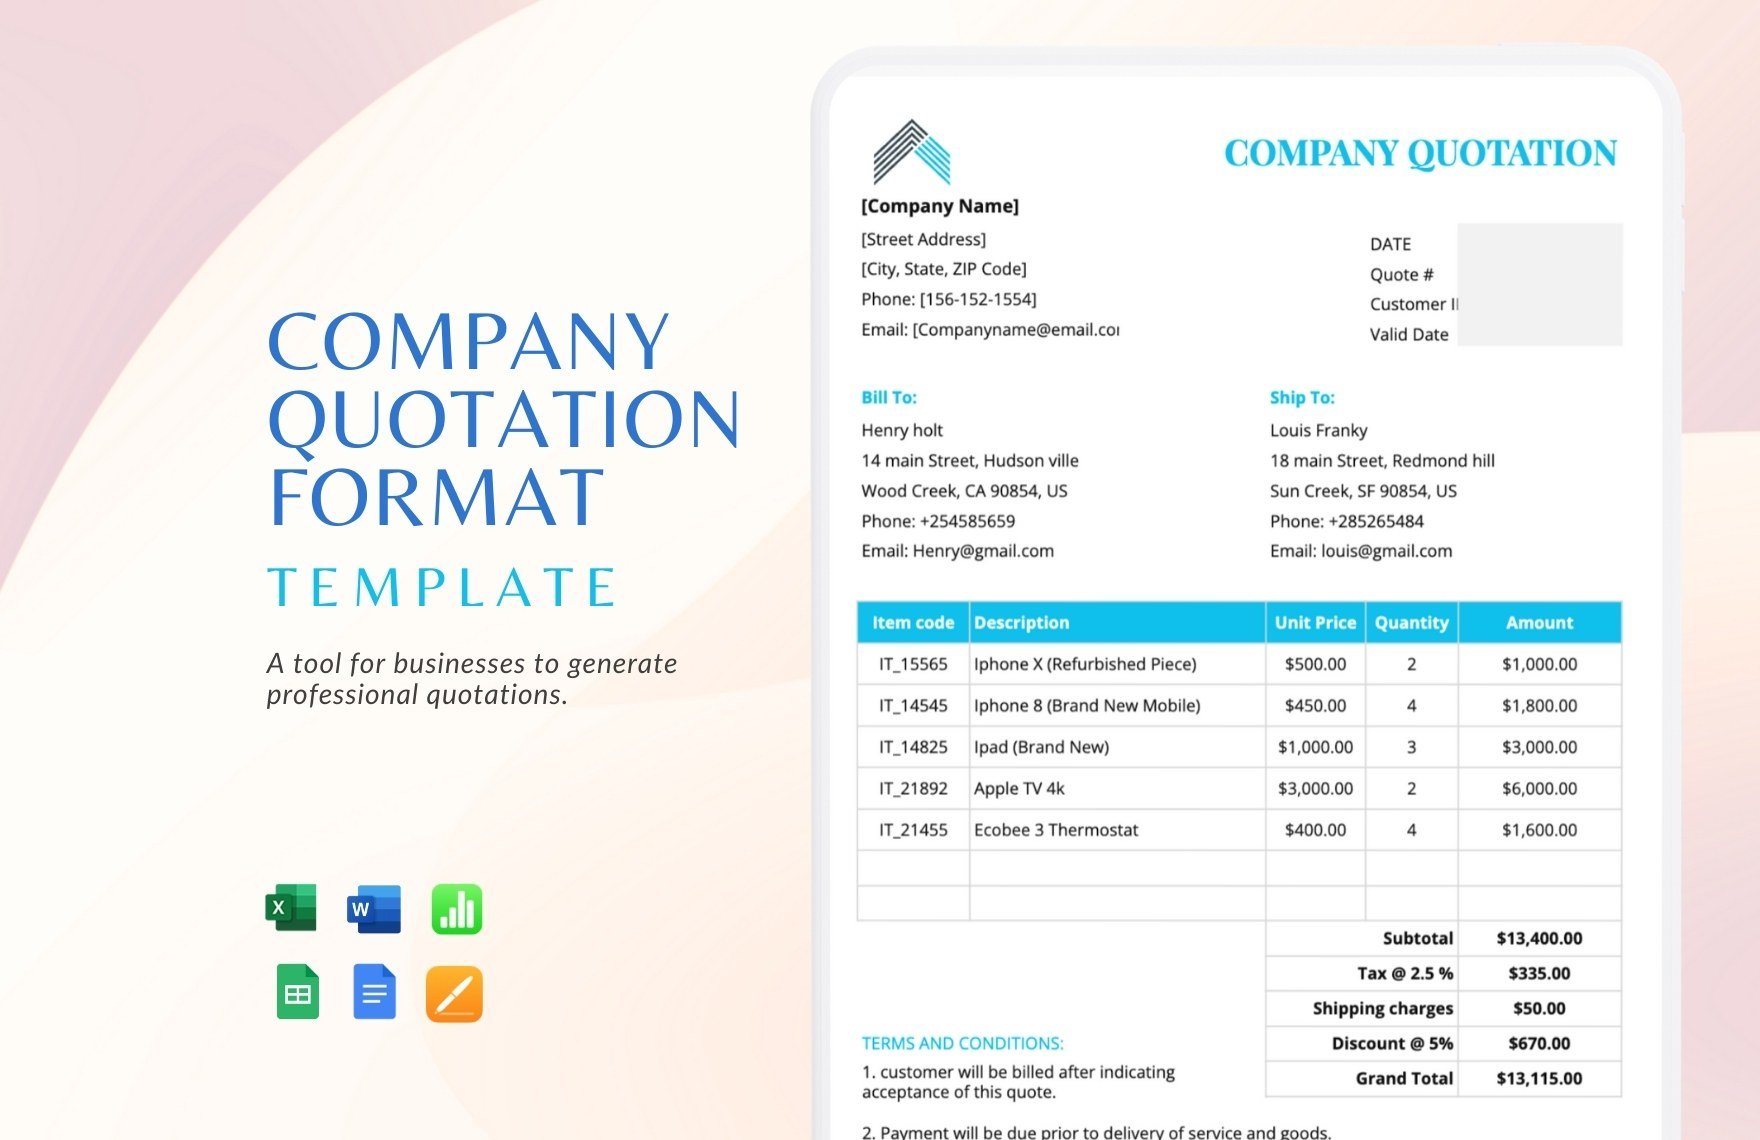 Company Quotation Format Template in Word, Google Docs, Excel, Google Sheets, Apple Pages, Apple Numbers